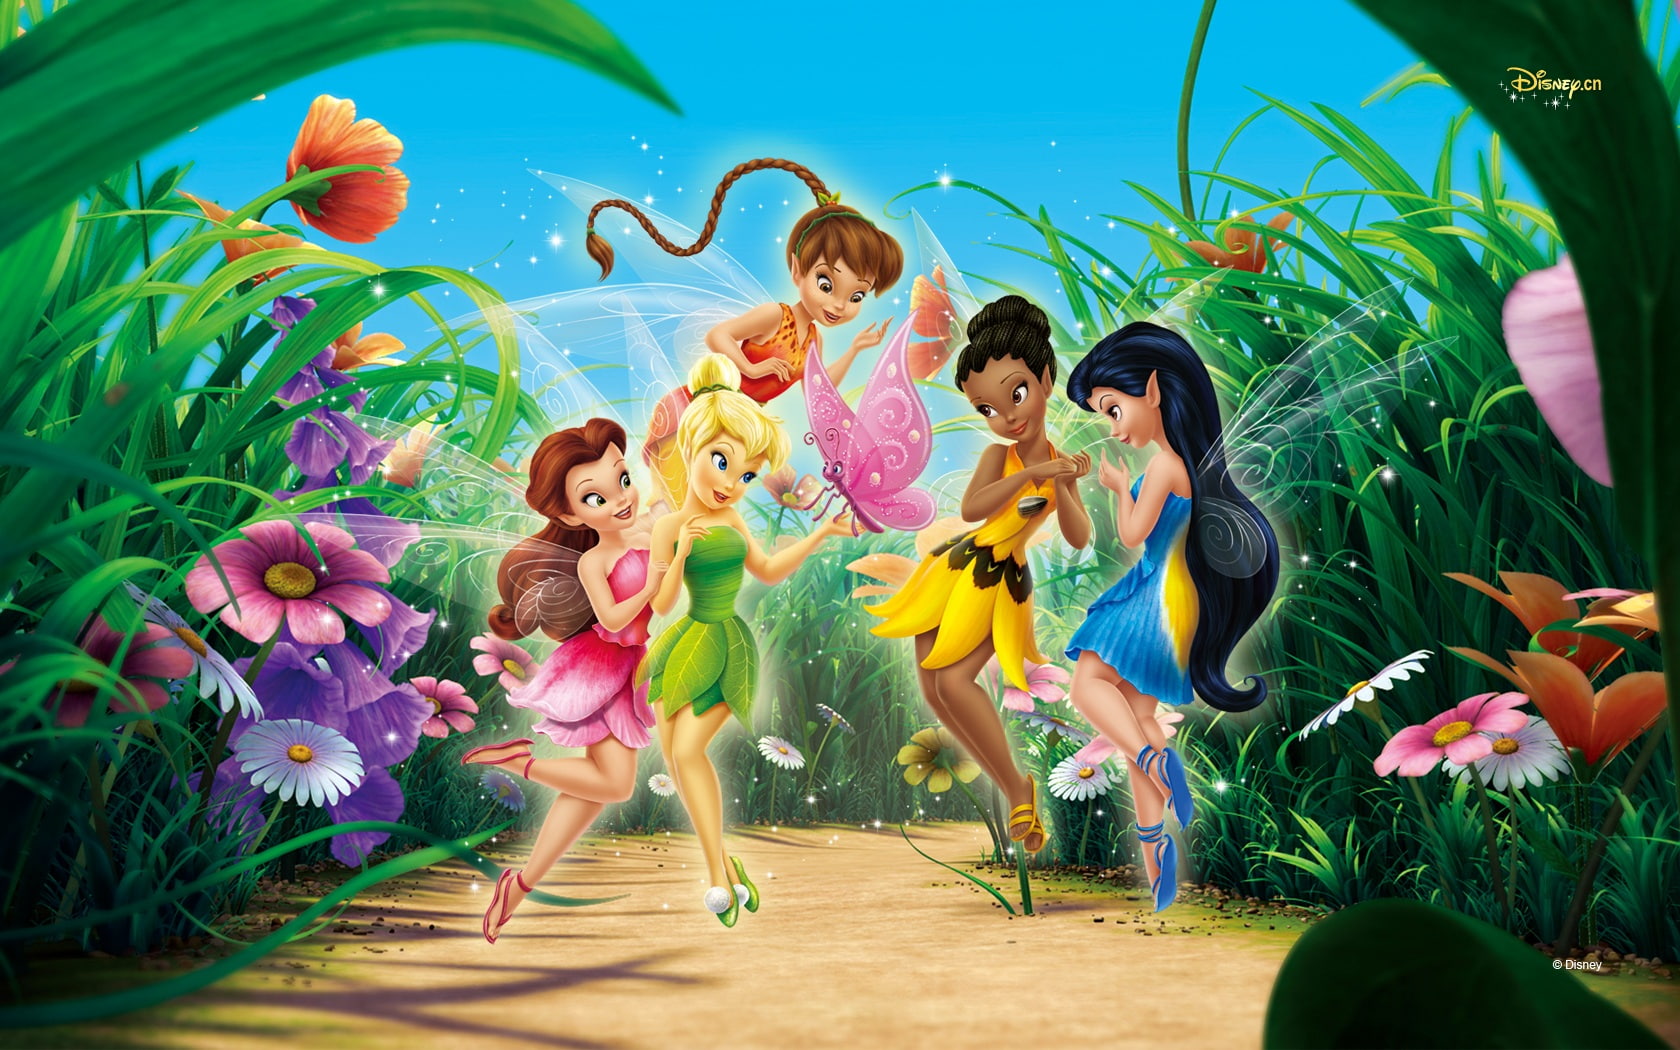 Fairies of the spring, tinker bell from peterfan illustration with friends